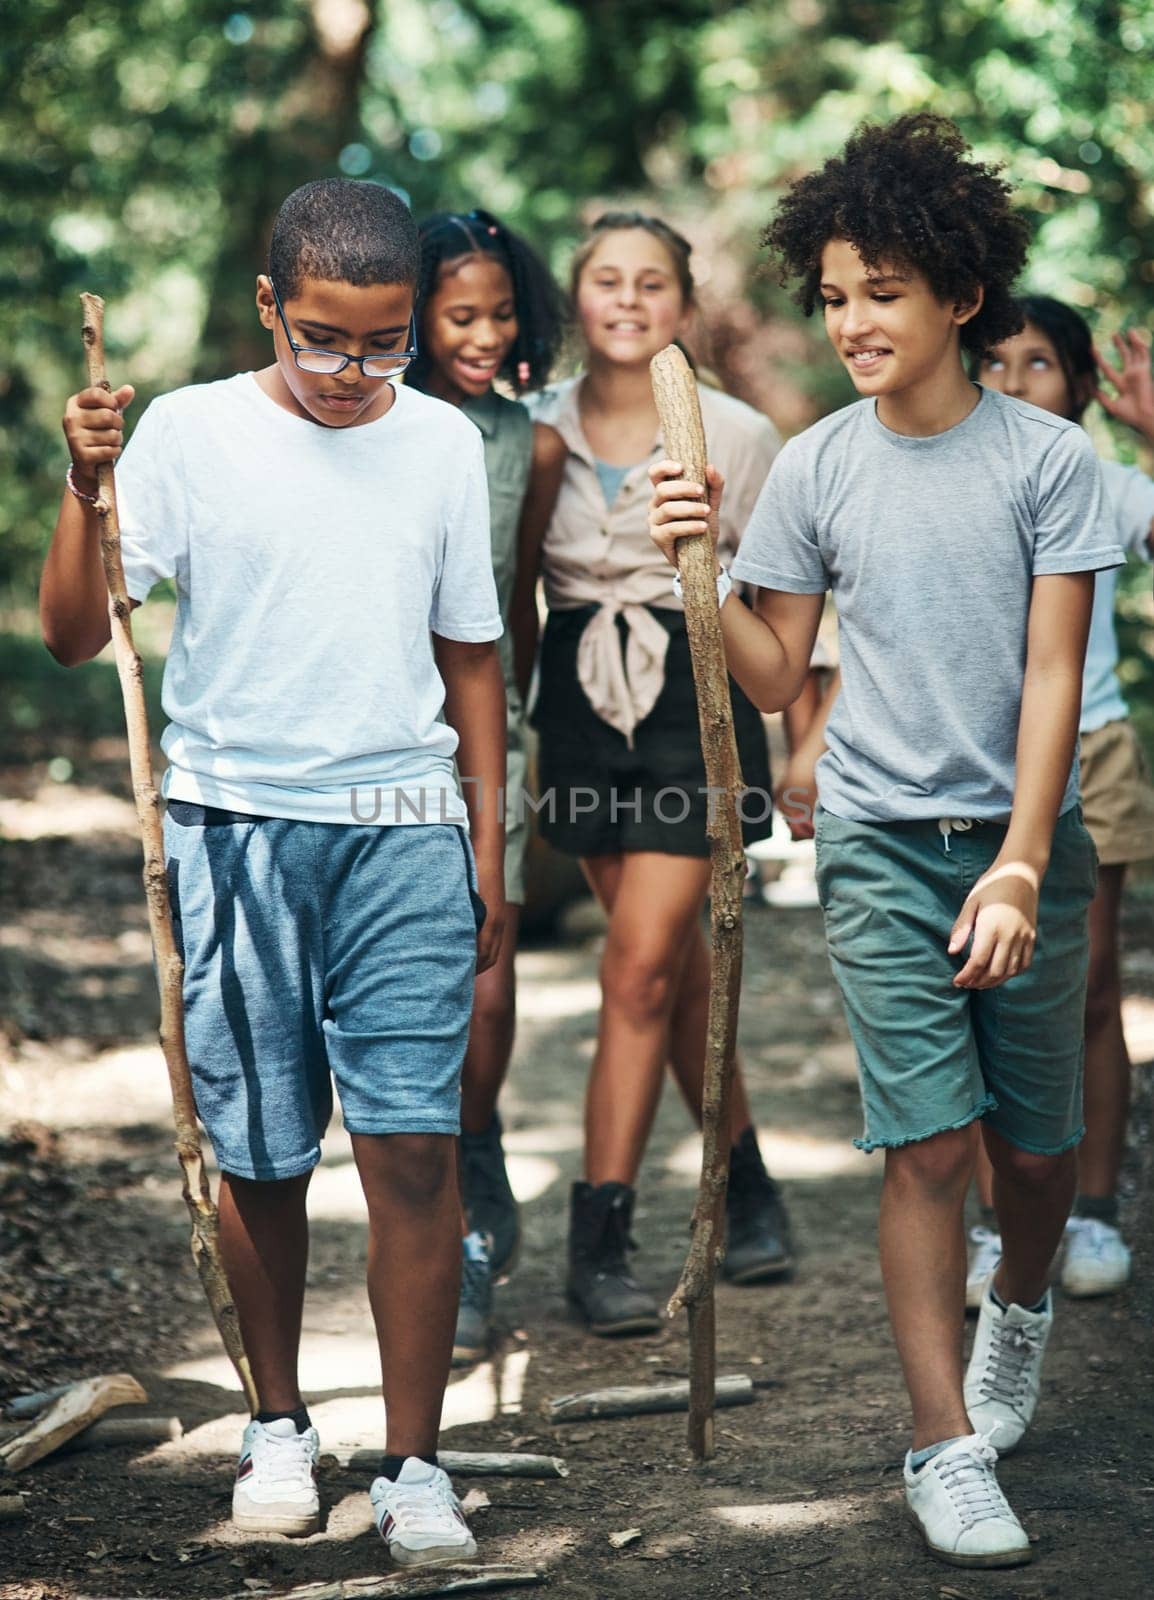 Camp time is adventure time. a group of teenagers exploring nature together at summer camp